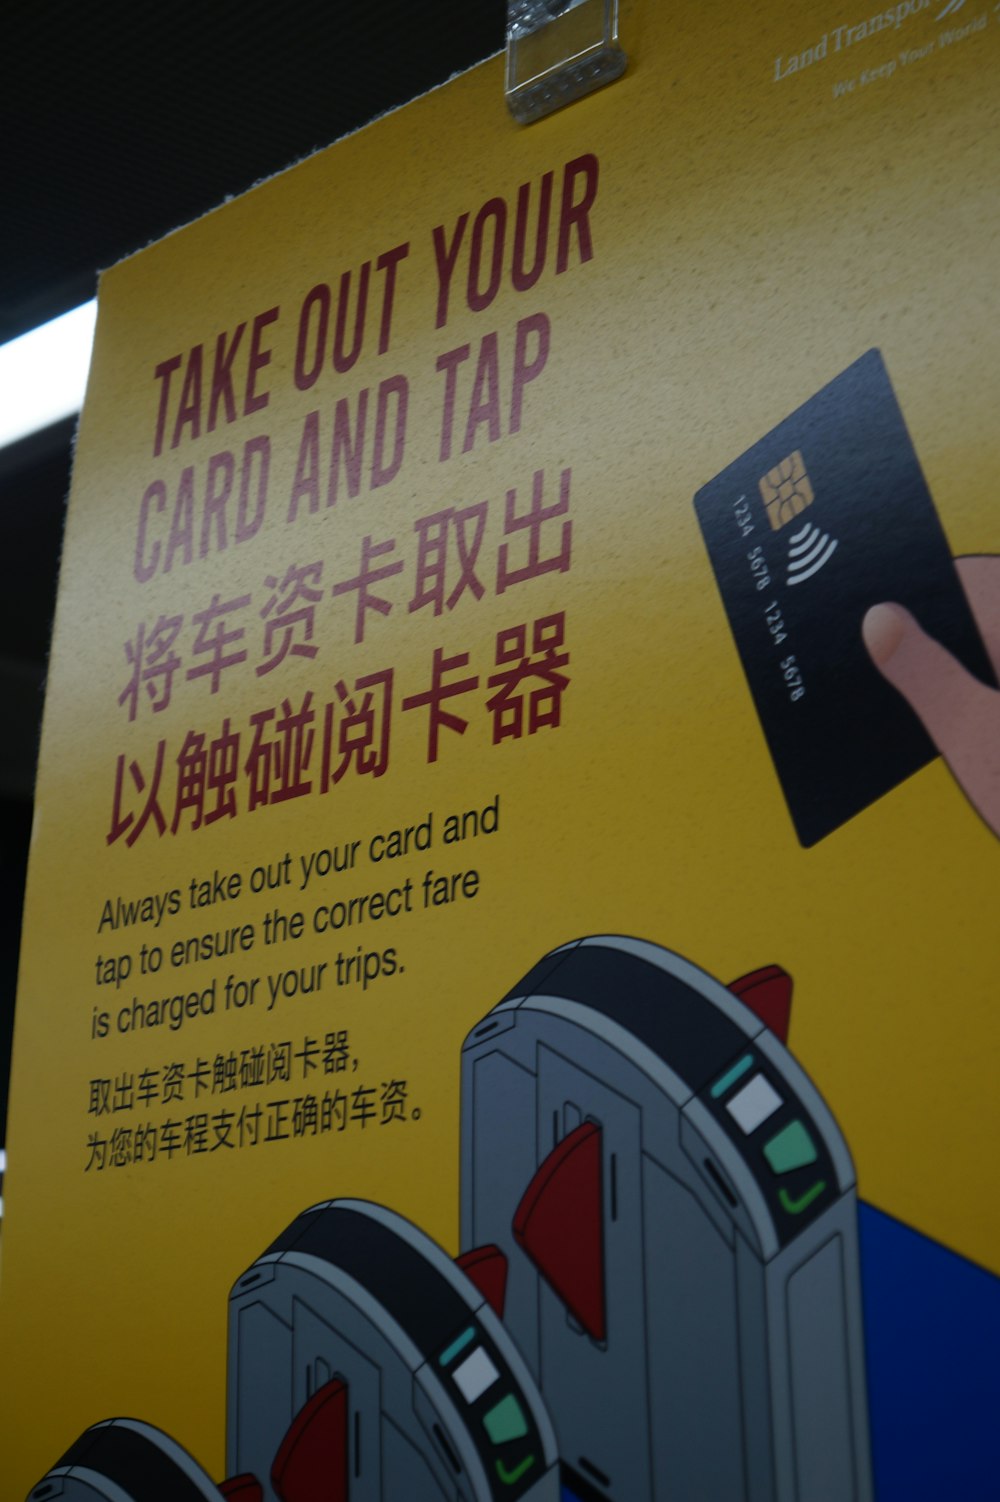 a yellow sign that says take out your card and tap